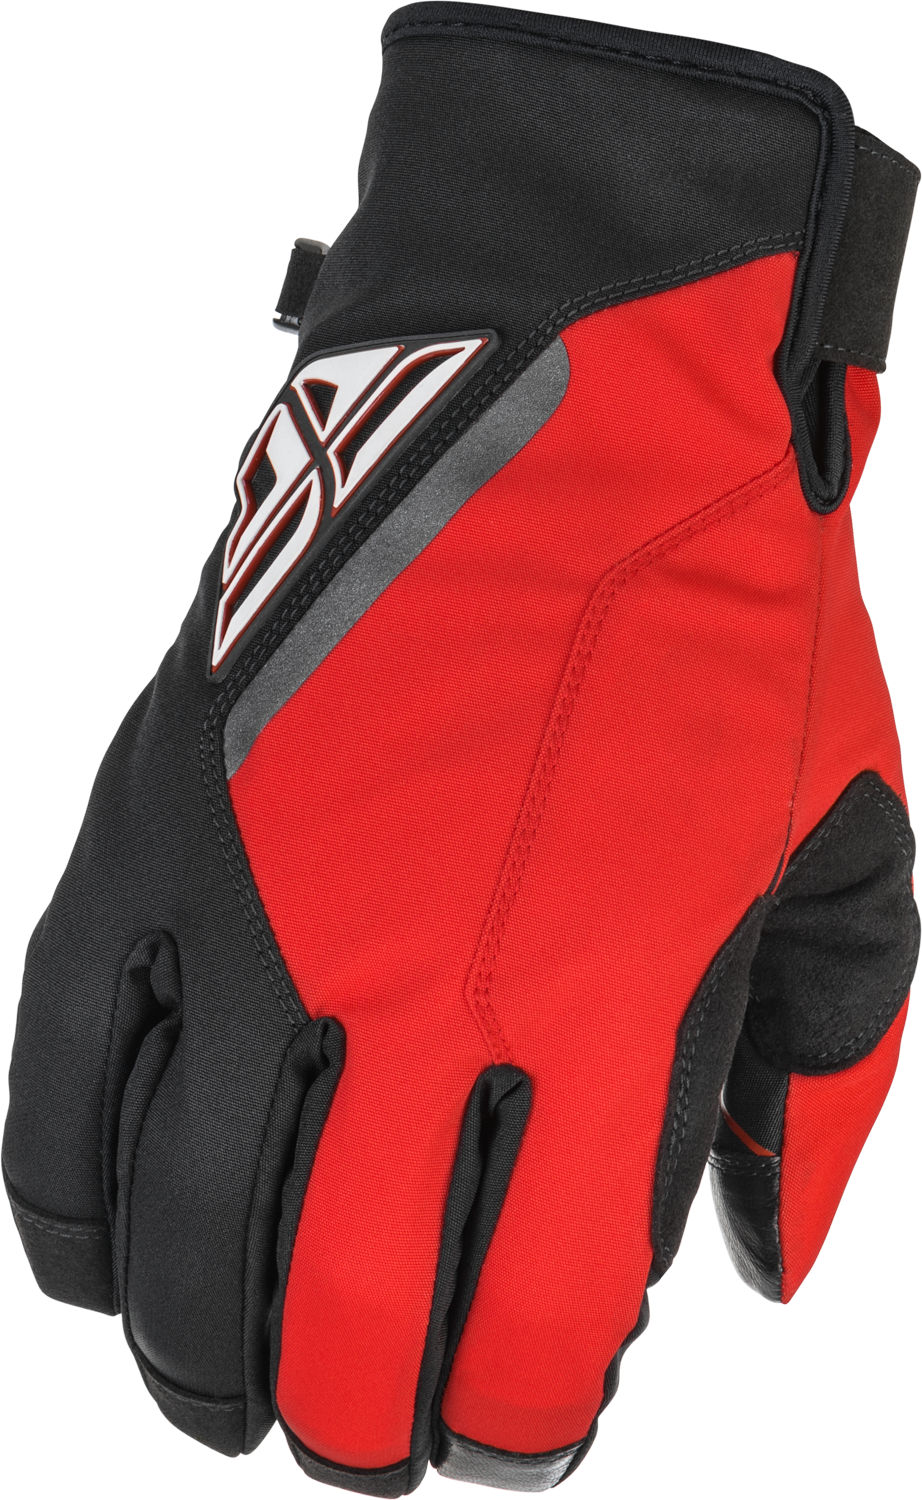 FLY RACING Title Gloves Black/Red Sz 11 371-05311